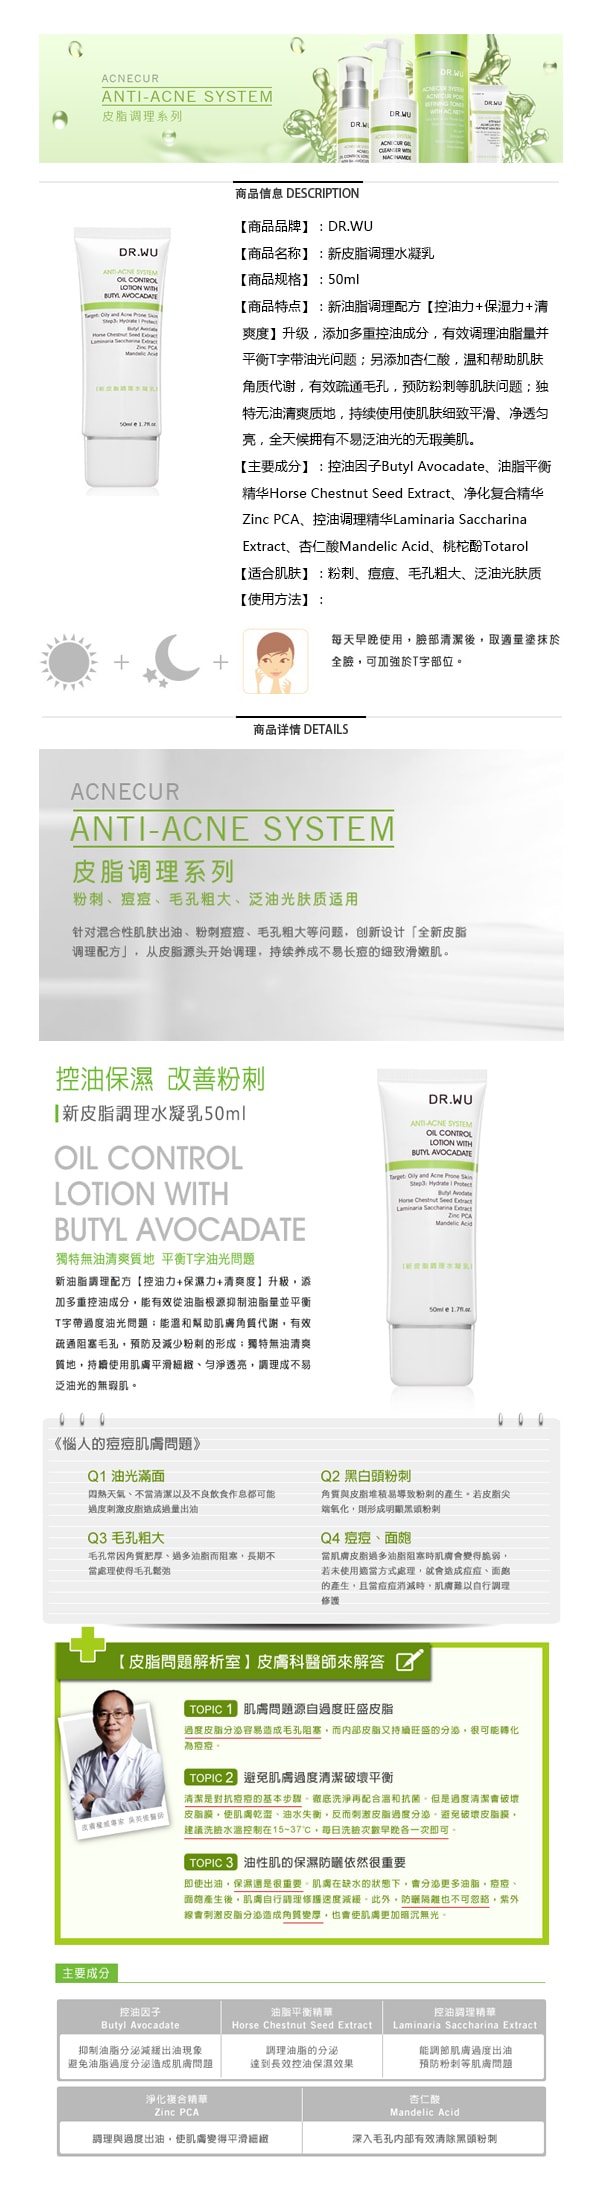 Oil Control Lotion With Butyl Avocadate 50ml